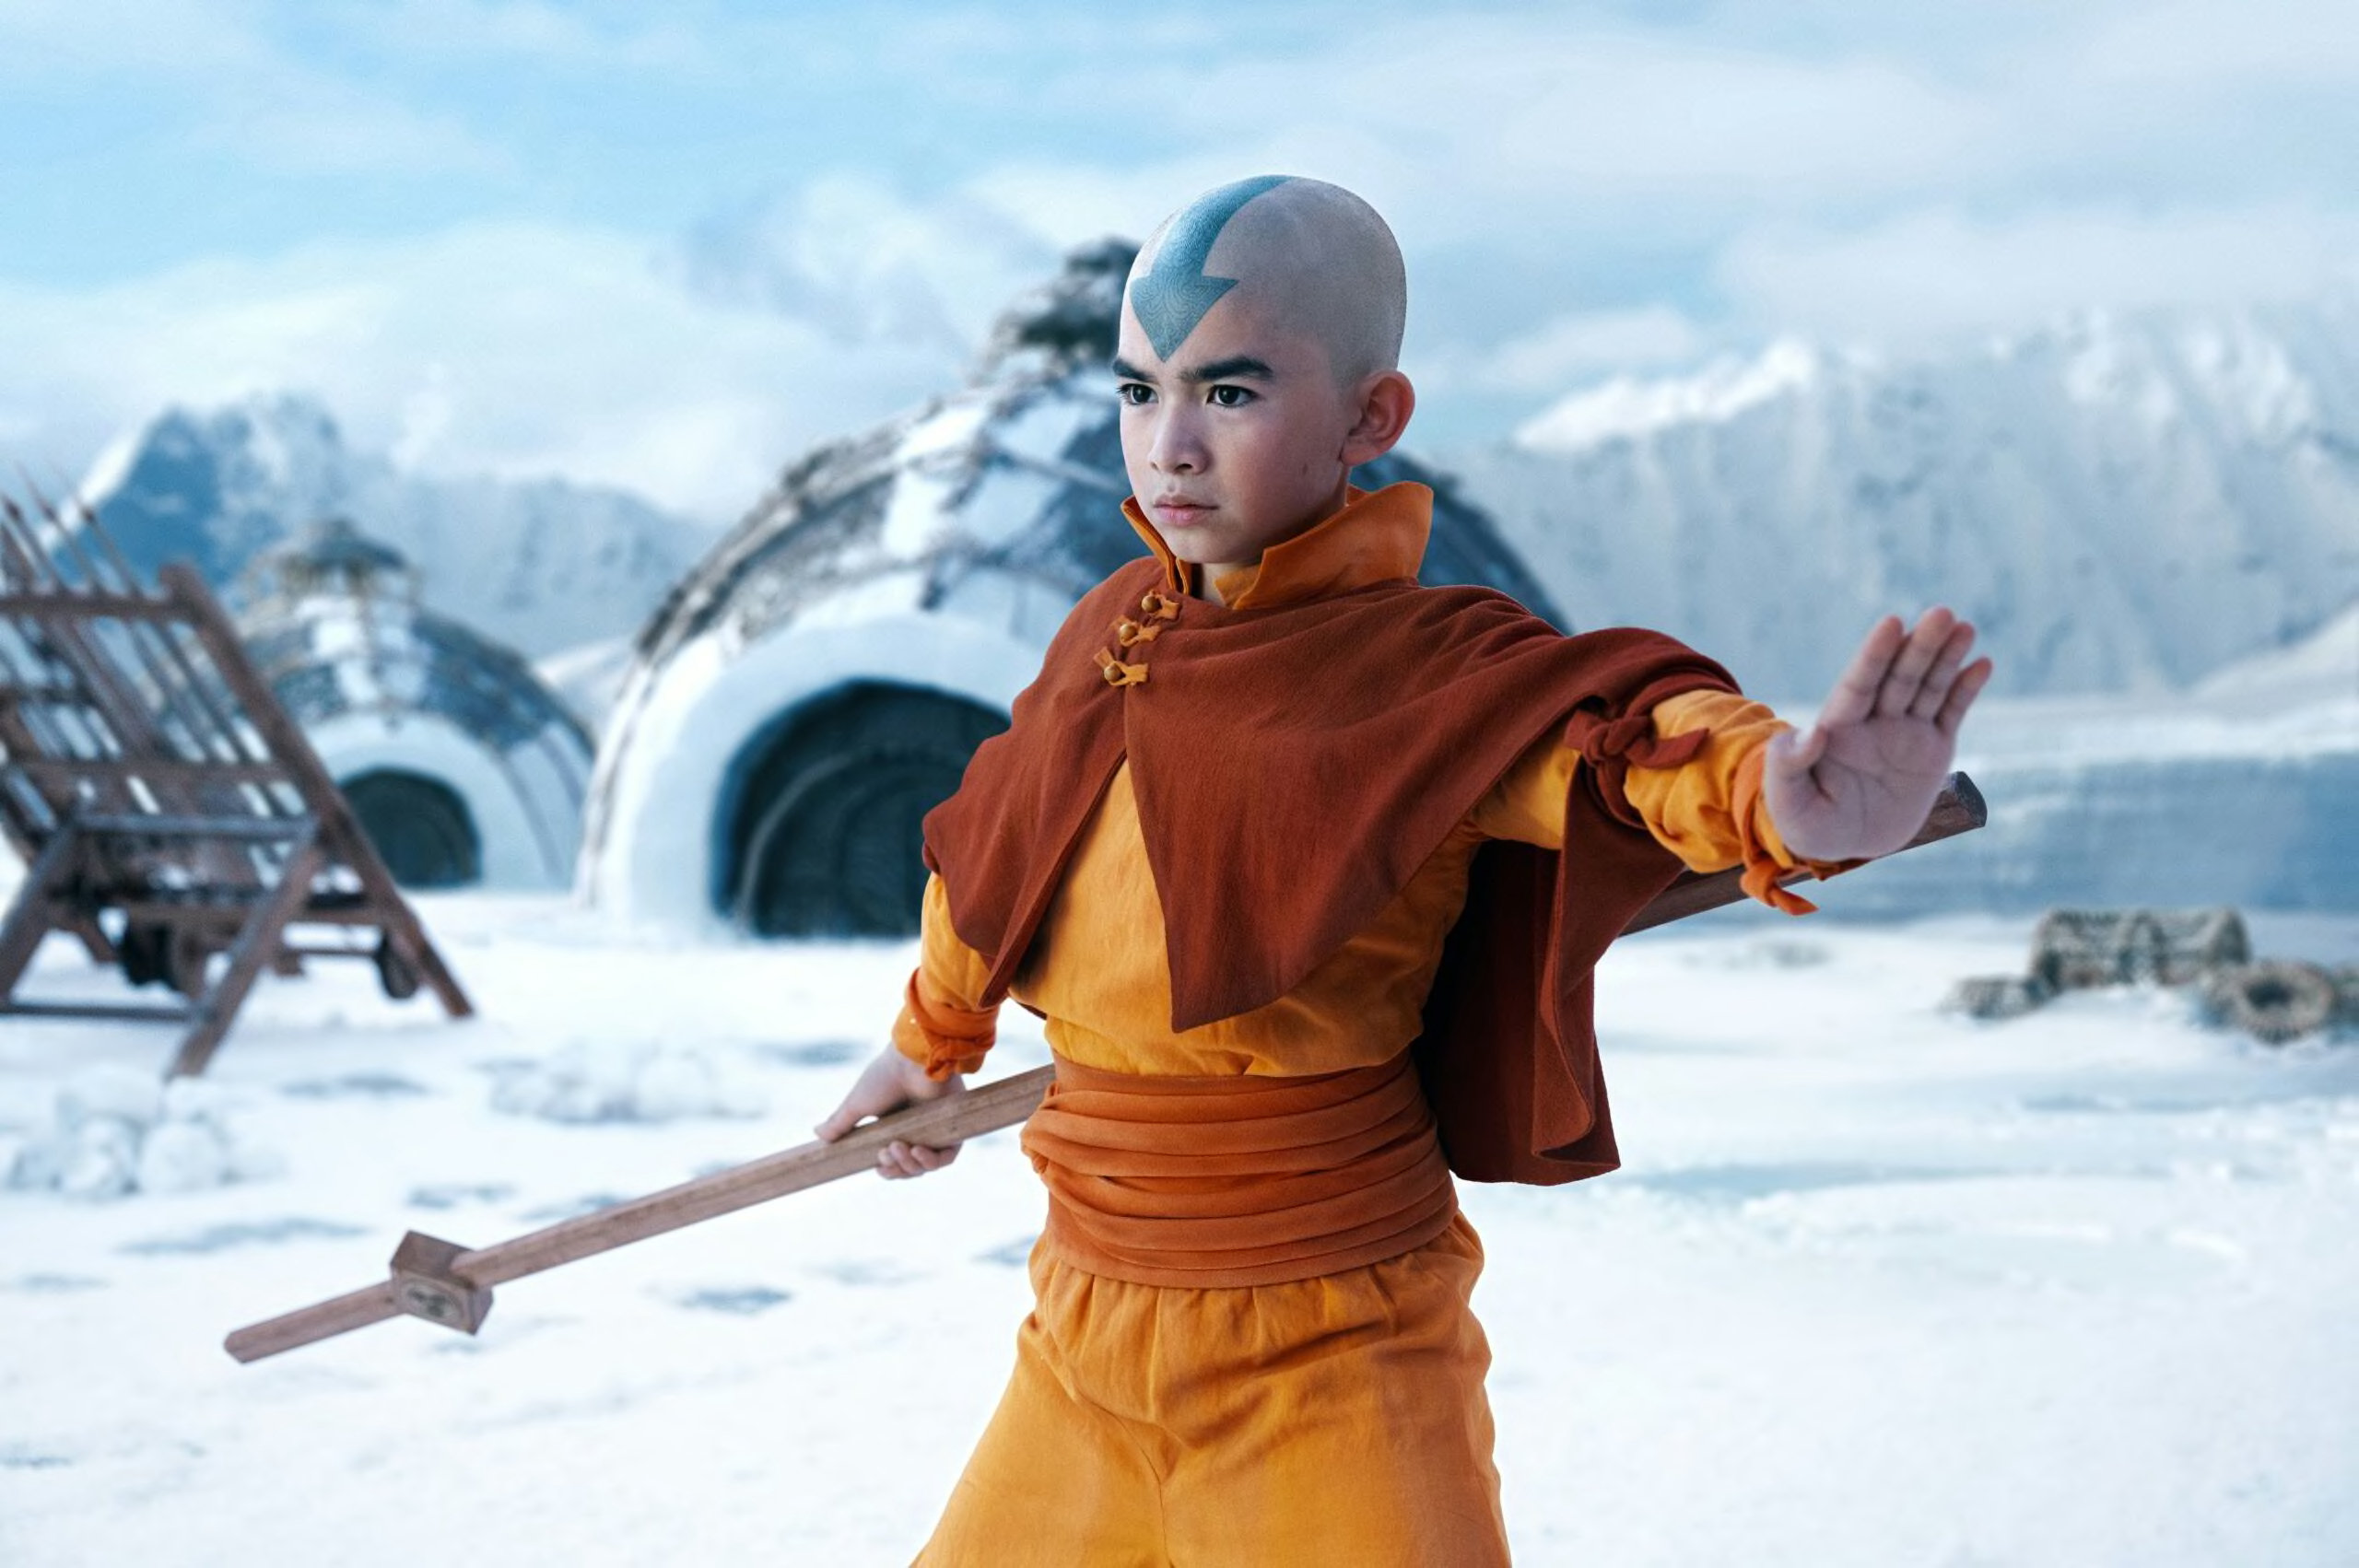 Every Episode of Avatar The Last Airbender Ranked